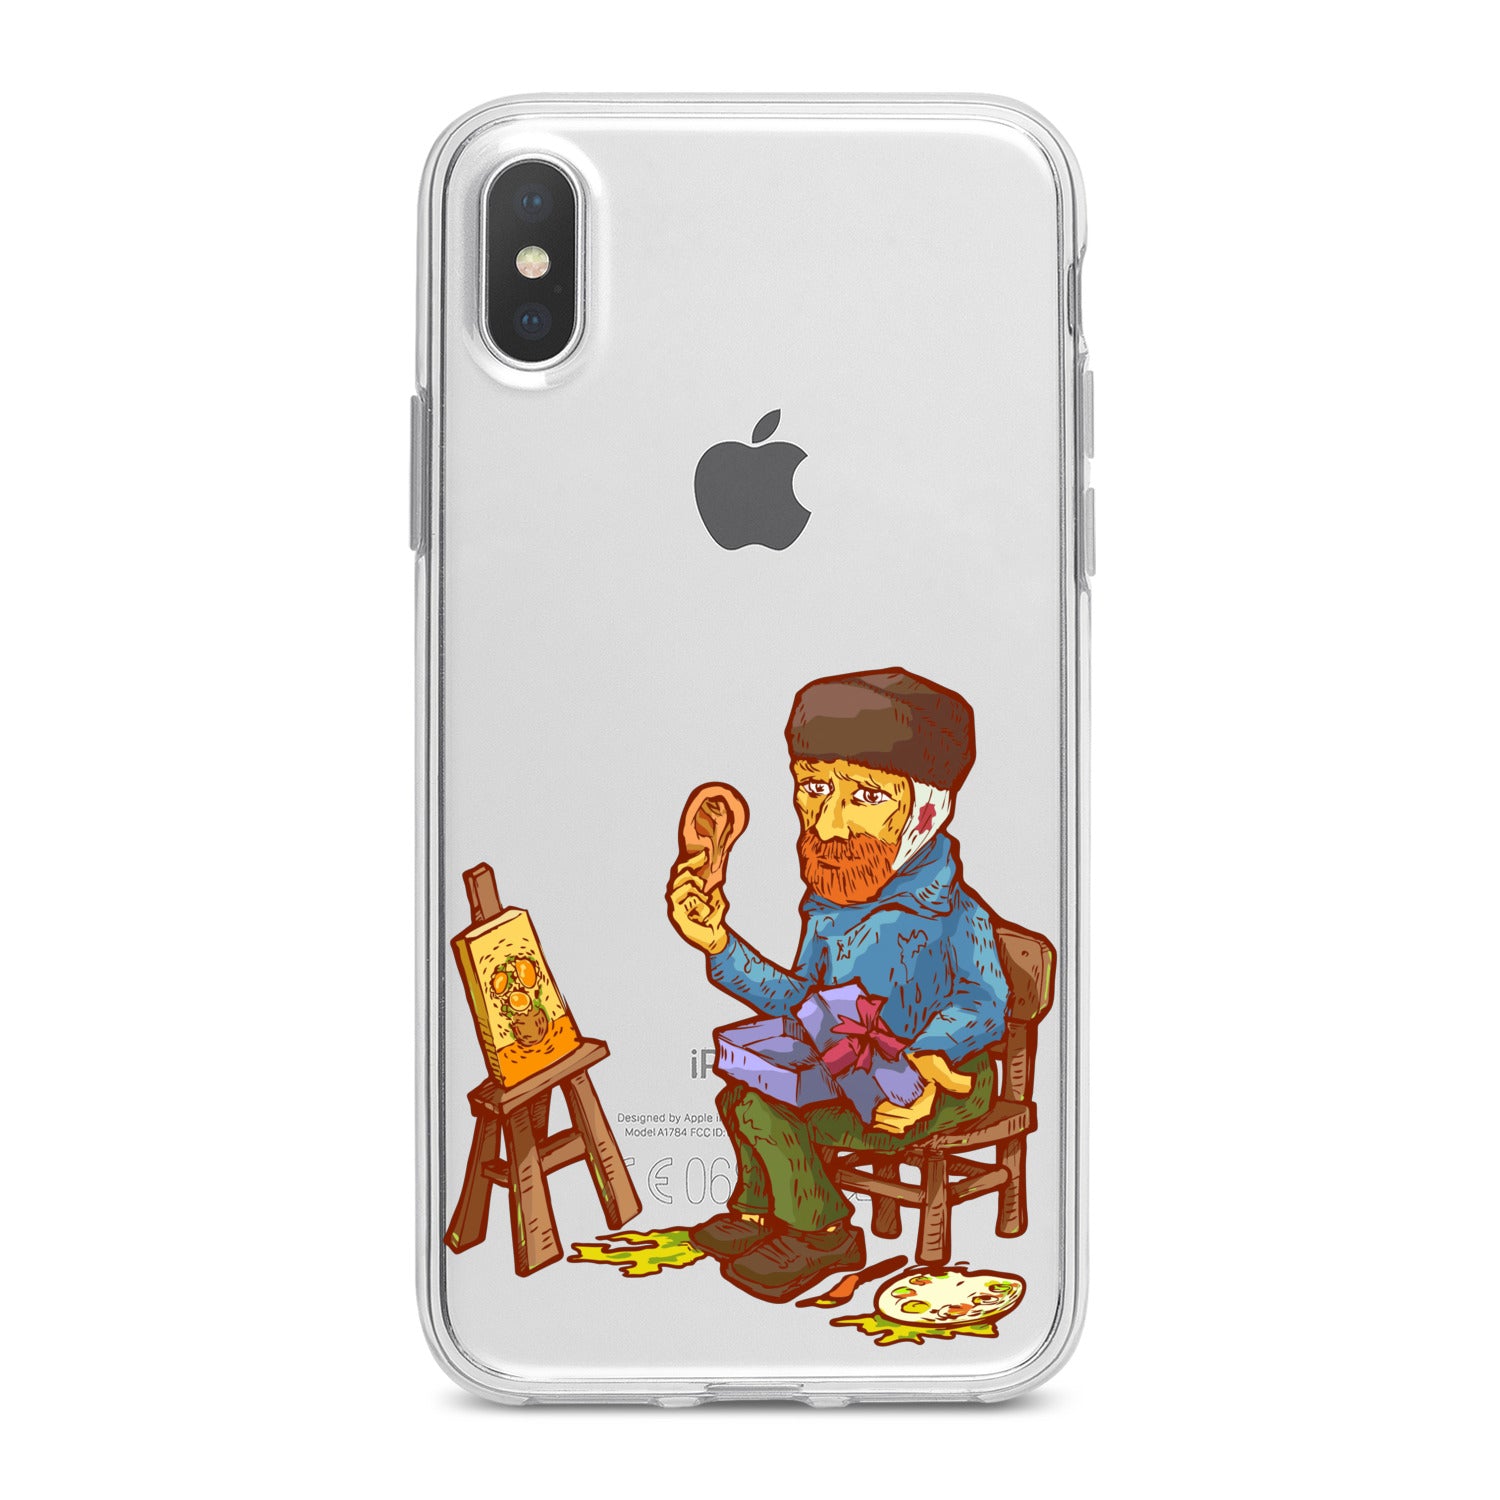 Lex Altern Artist Creation Phone Case for your iPhone & Android phone.